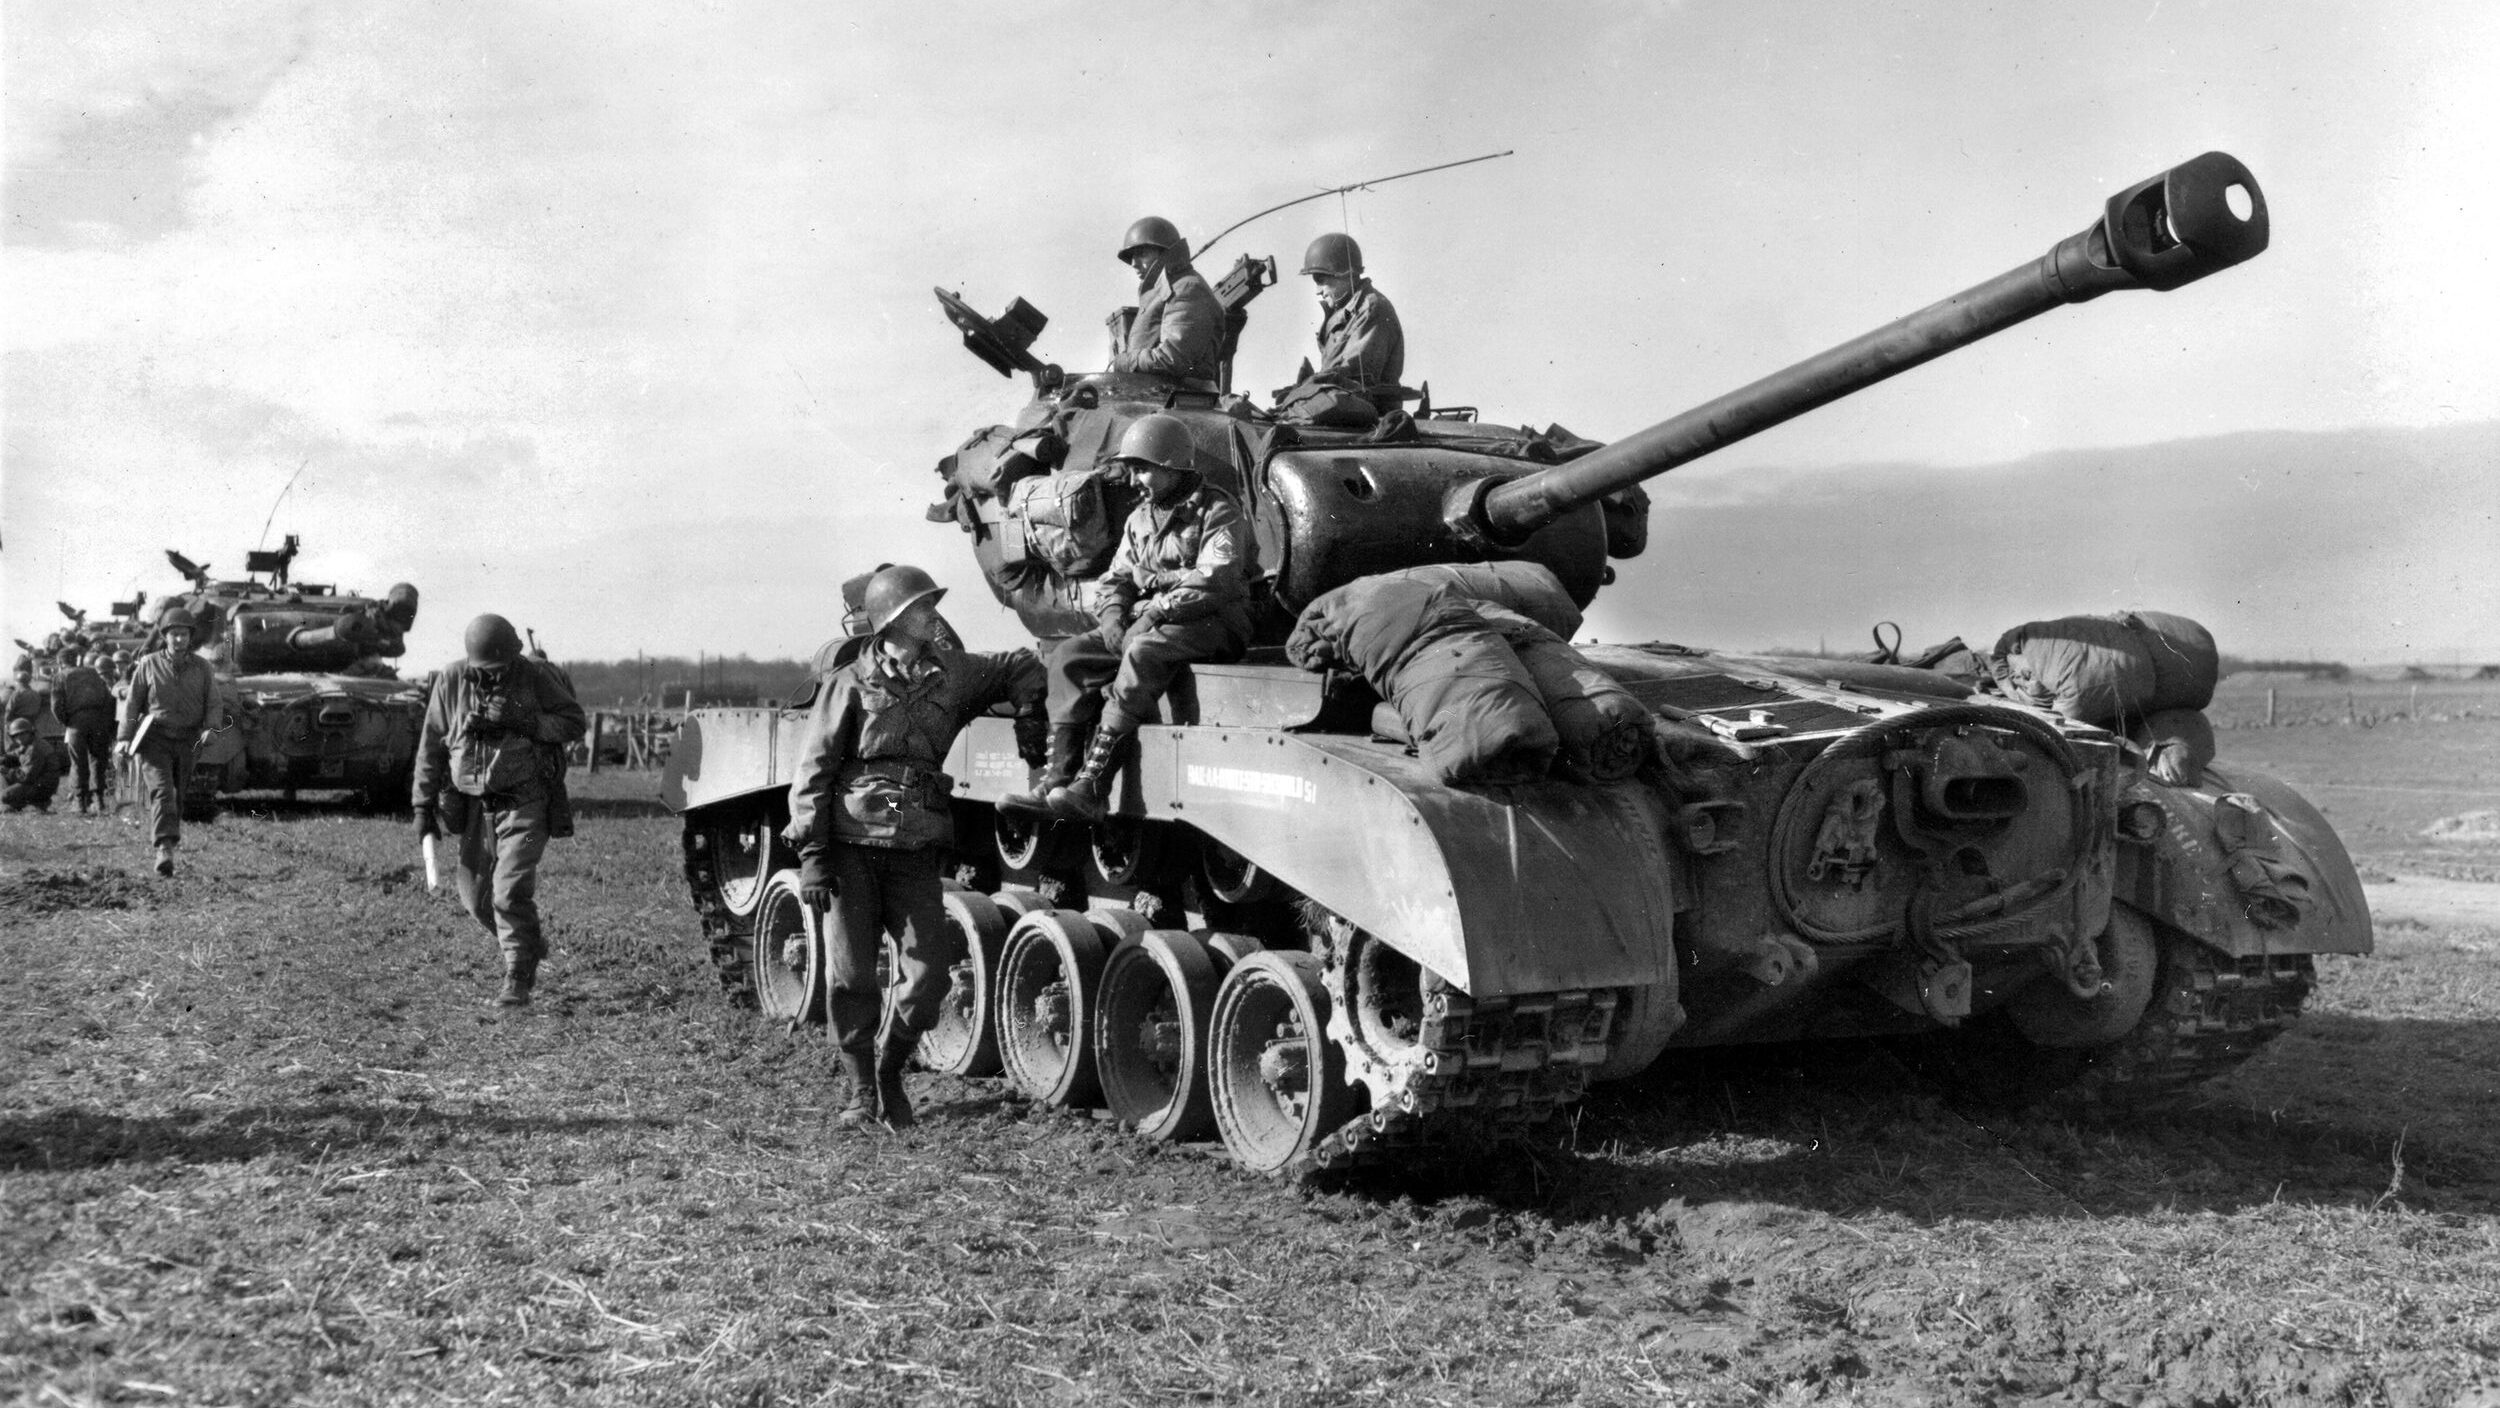 Crews of the 14th Tank Battalion, 9th Armored Division, await with their new M-26A3 Pershing tanks for the word to advance in early March. Elements of the unit commanded by 2nd Lt. John Grimbal were among the first to arrive at the Ludendorff Bridge with four of the new heavy tanks.